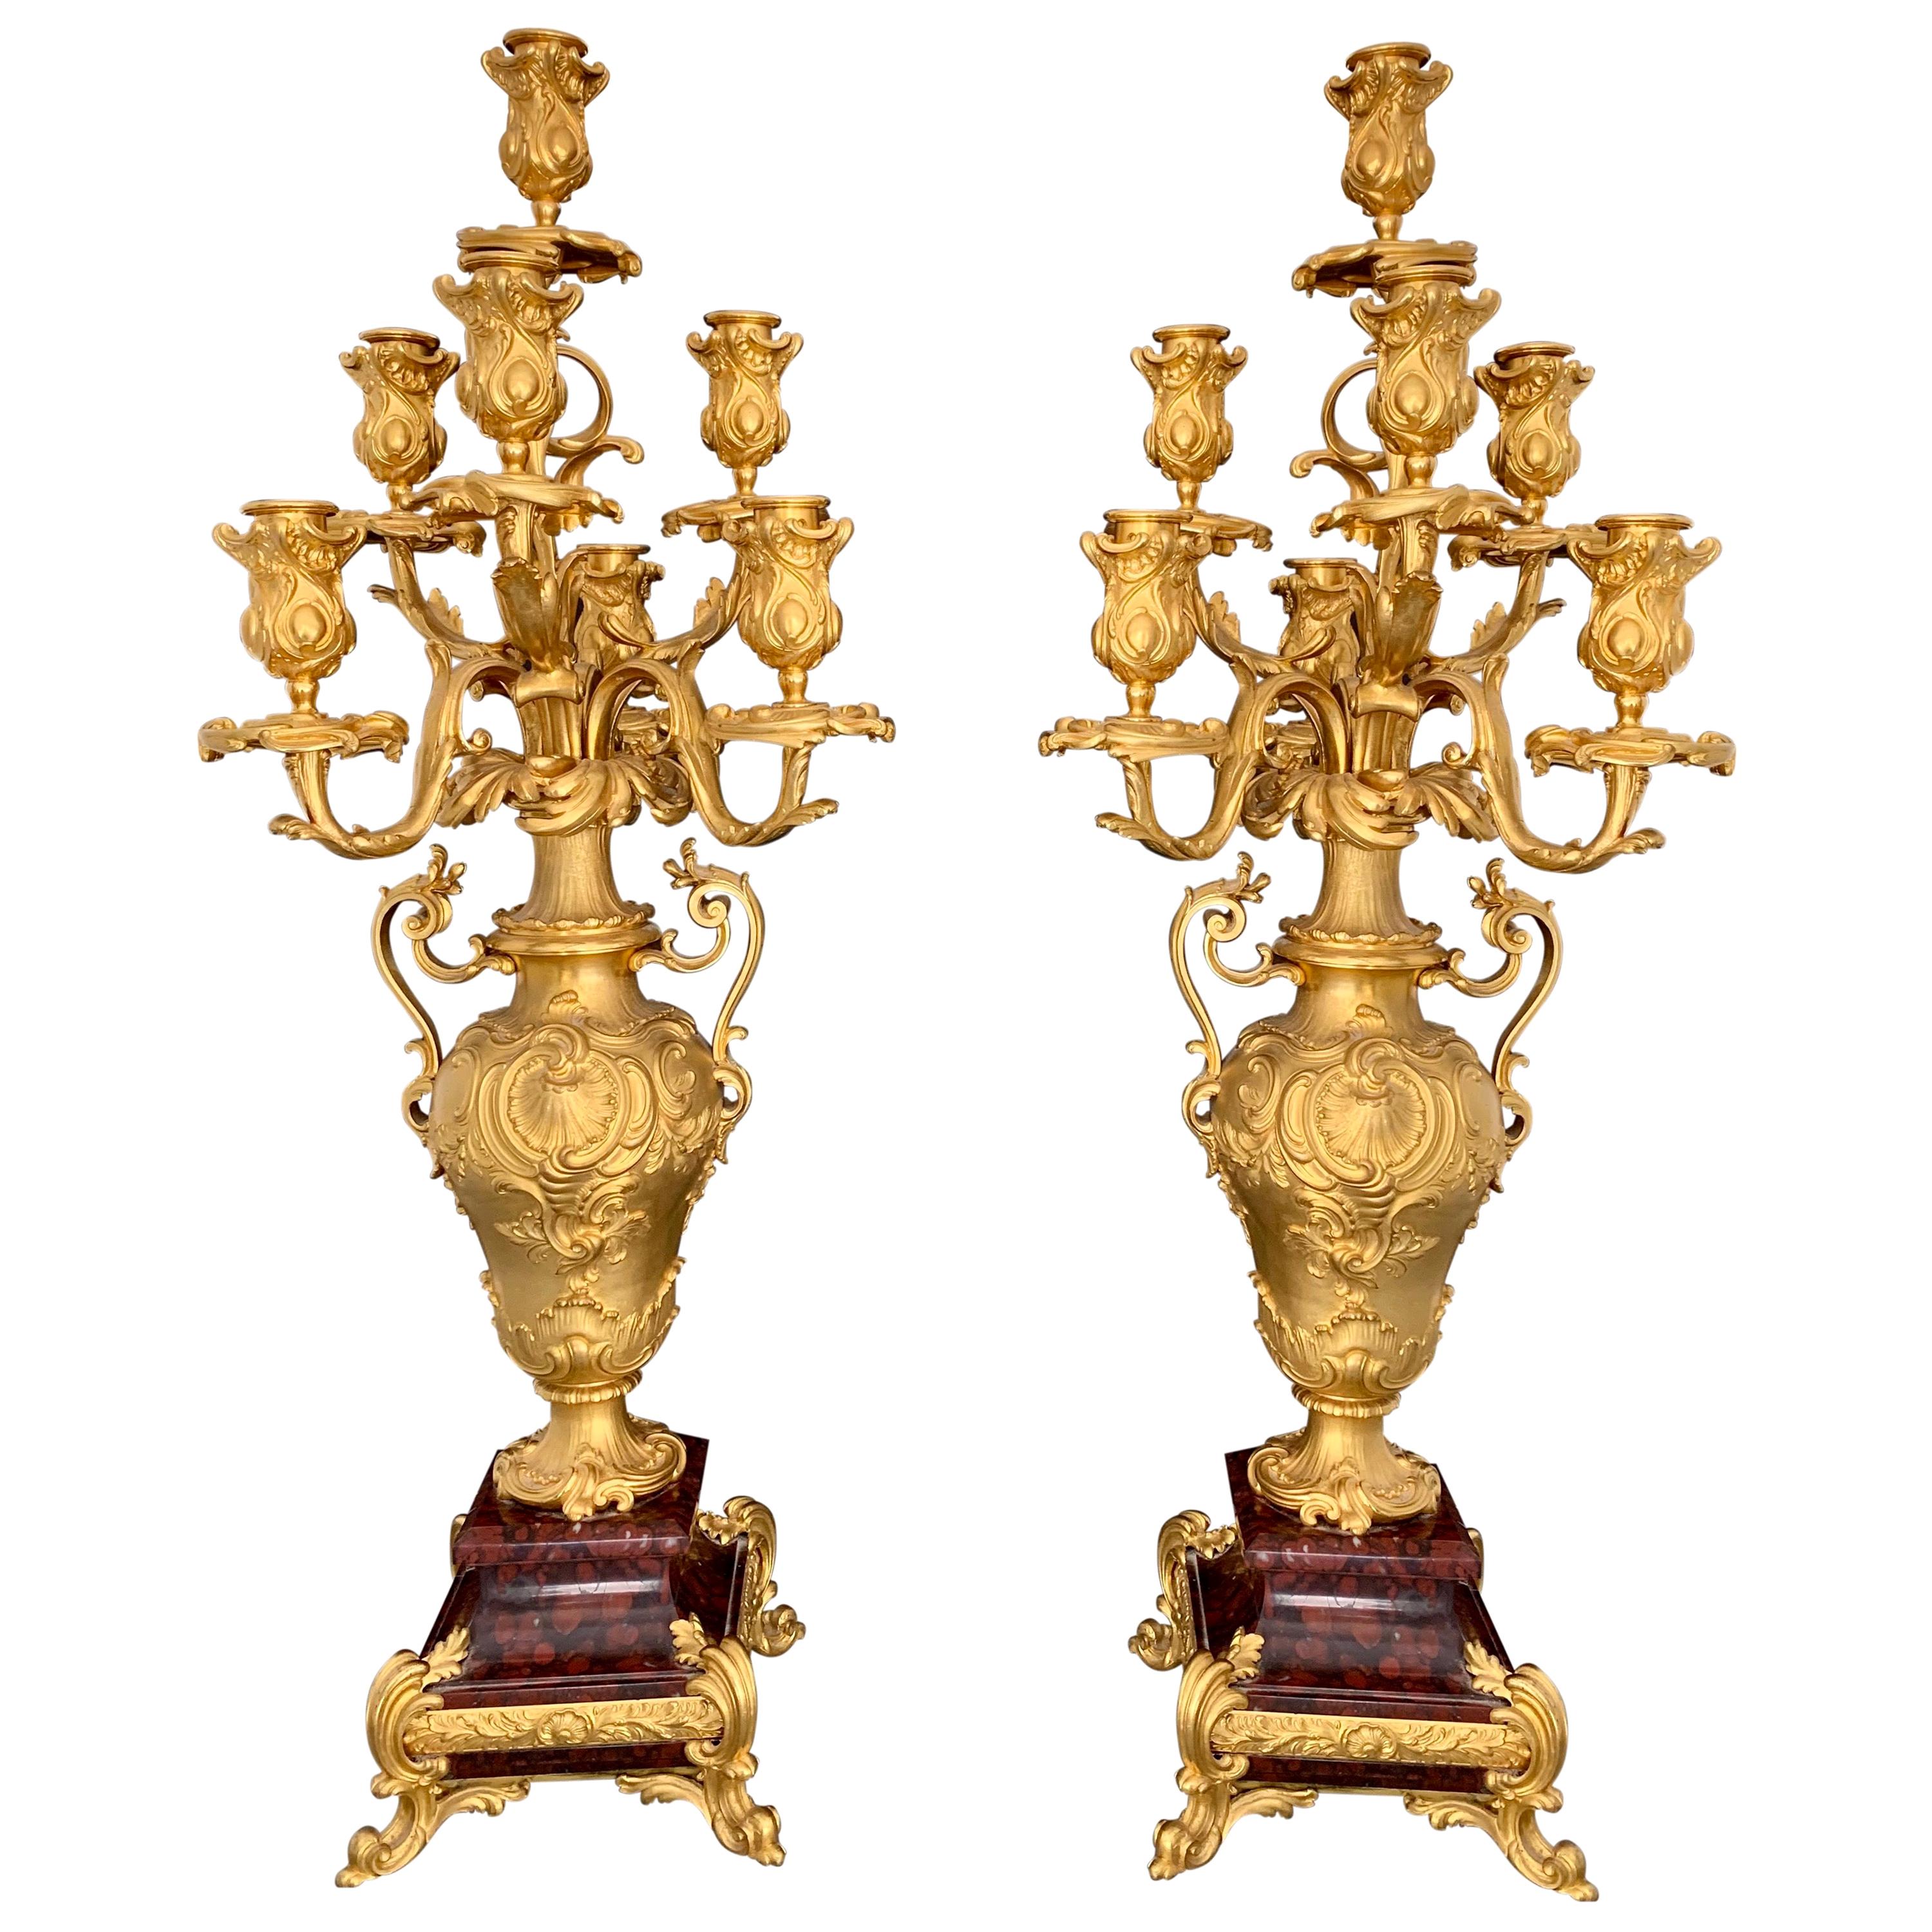 Pair of 19th Century French Ormolu Candelabras by Barbedienne